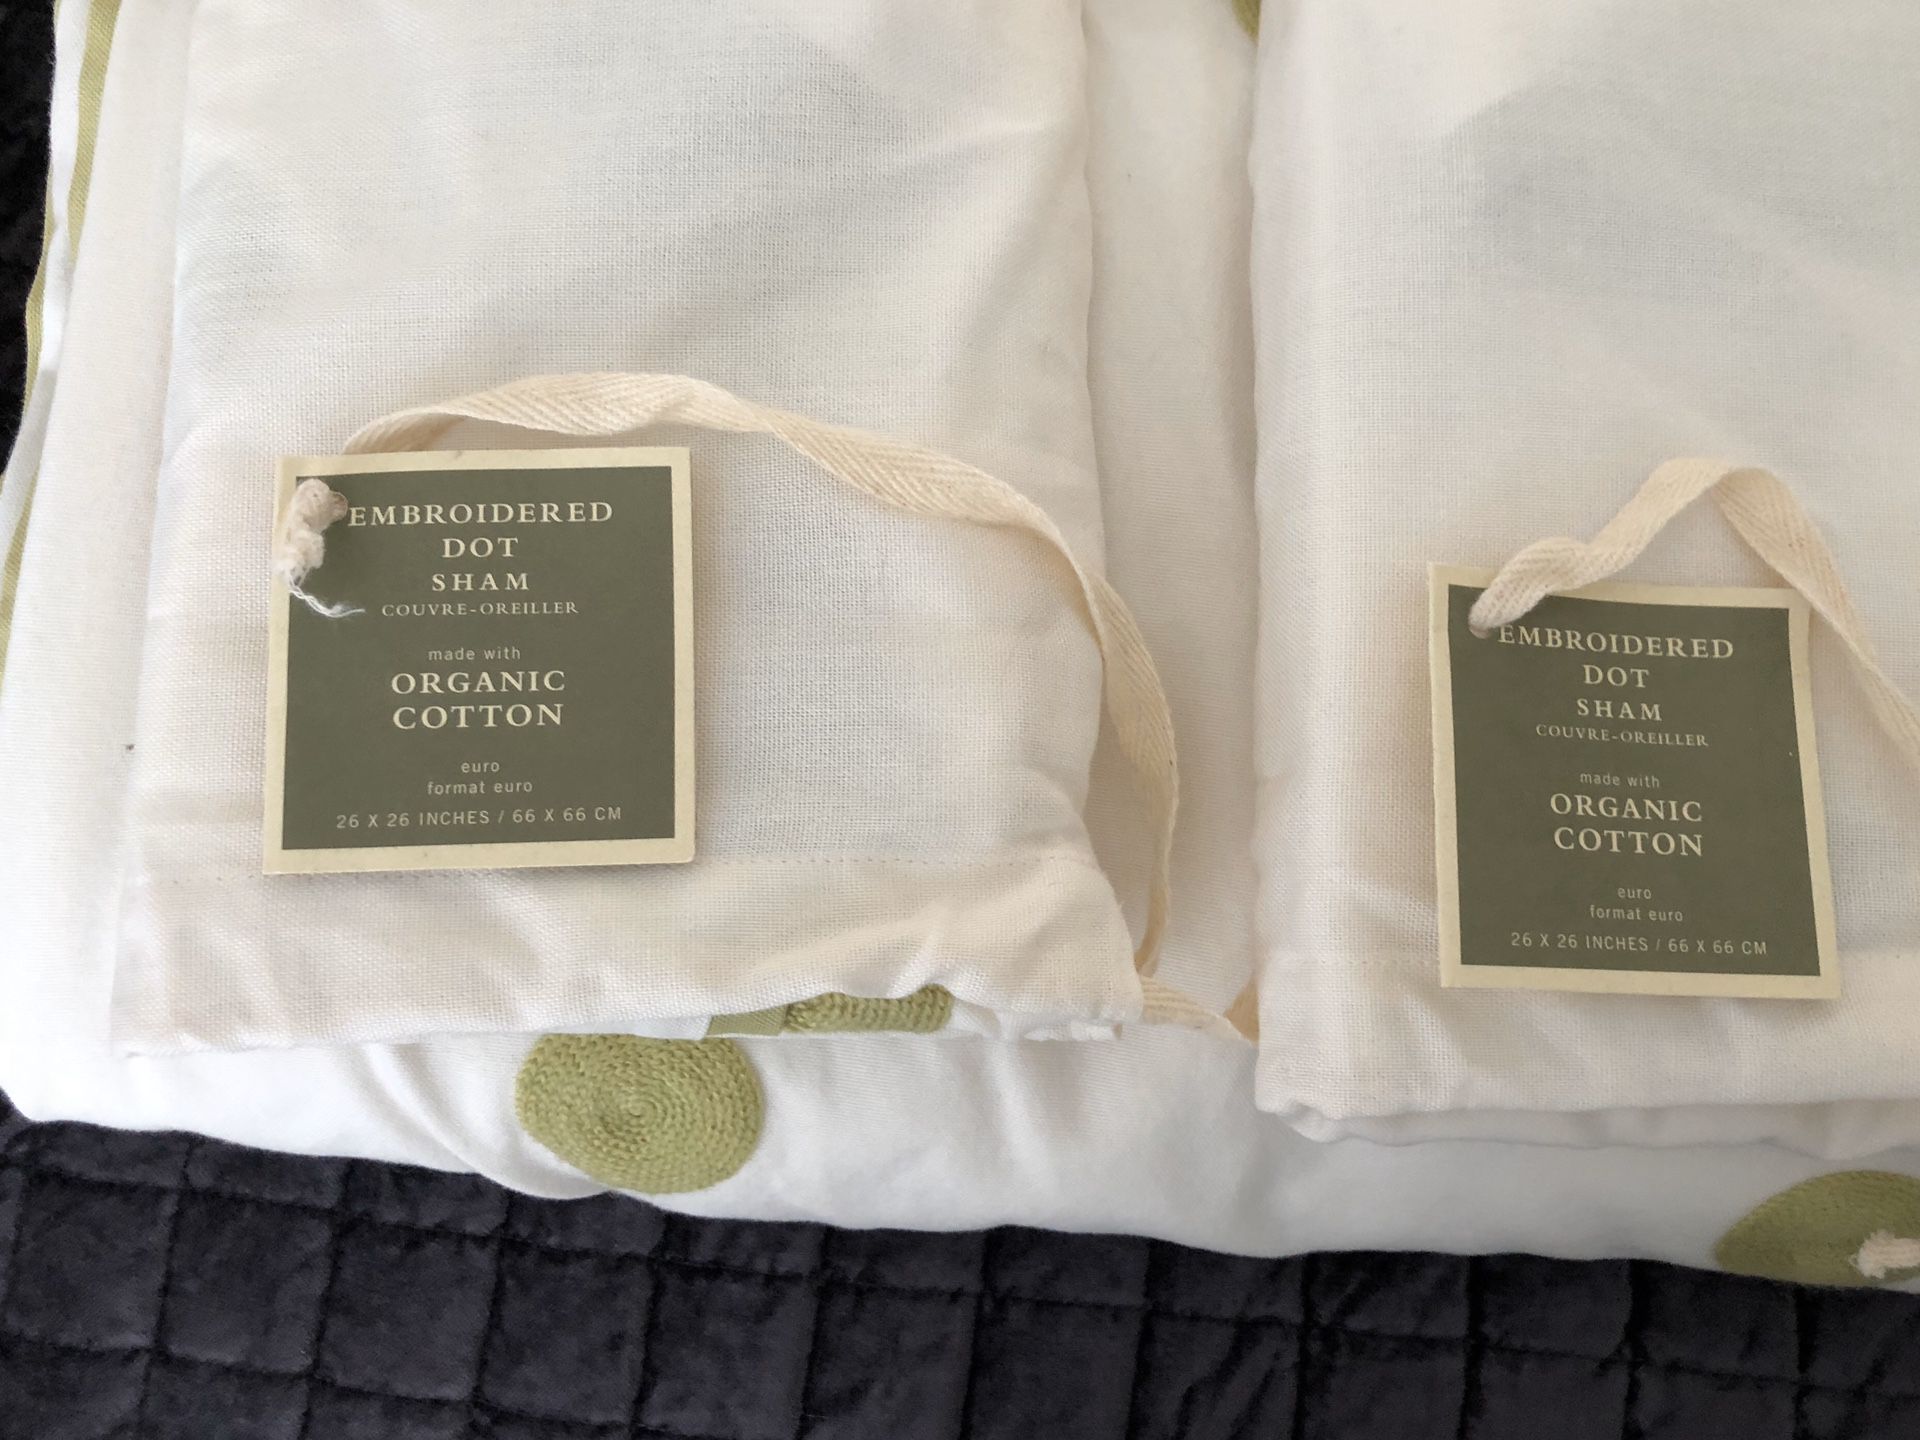 Pottery barn duvet with pillows cases queen